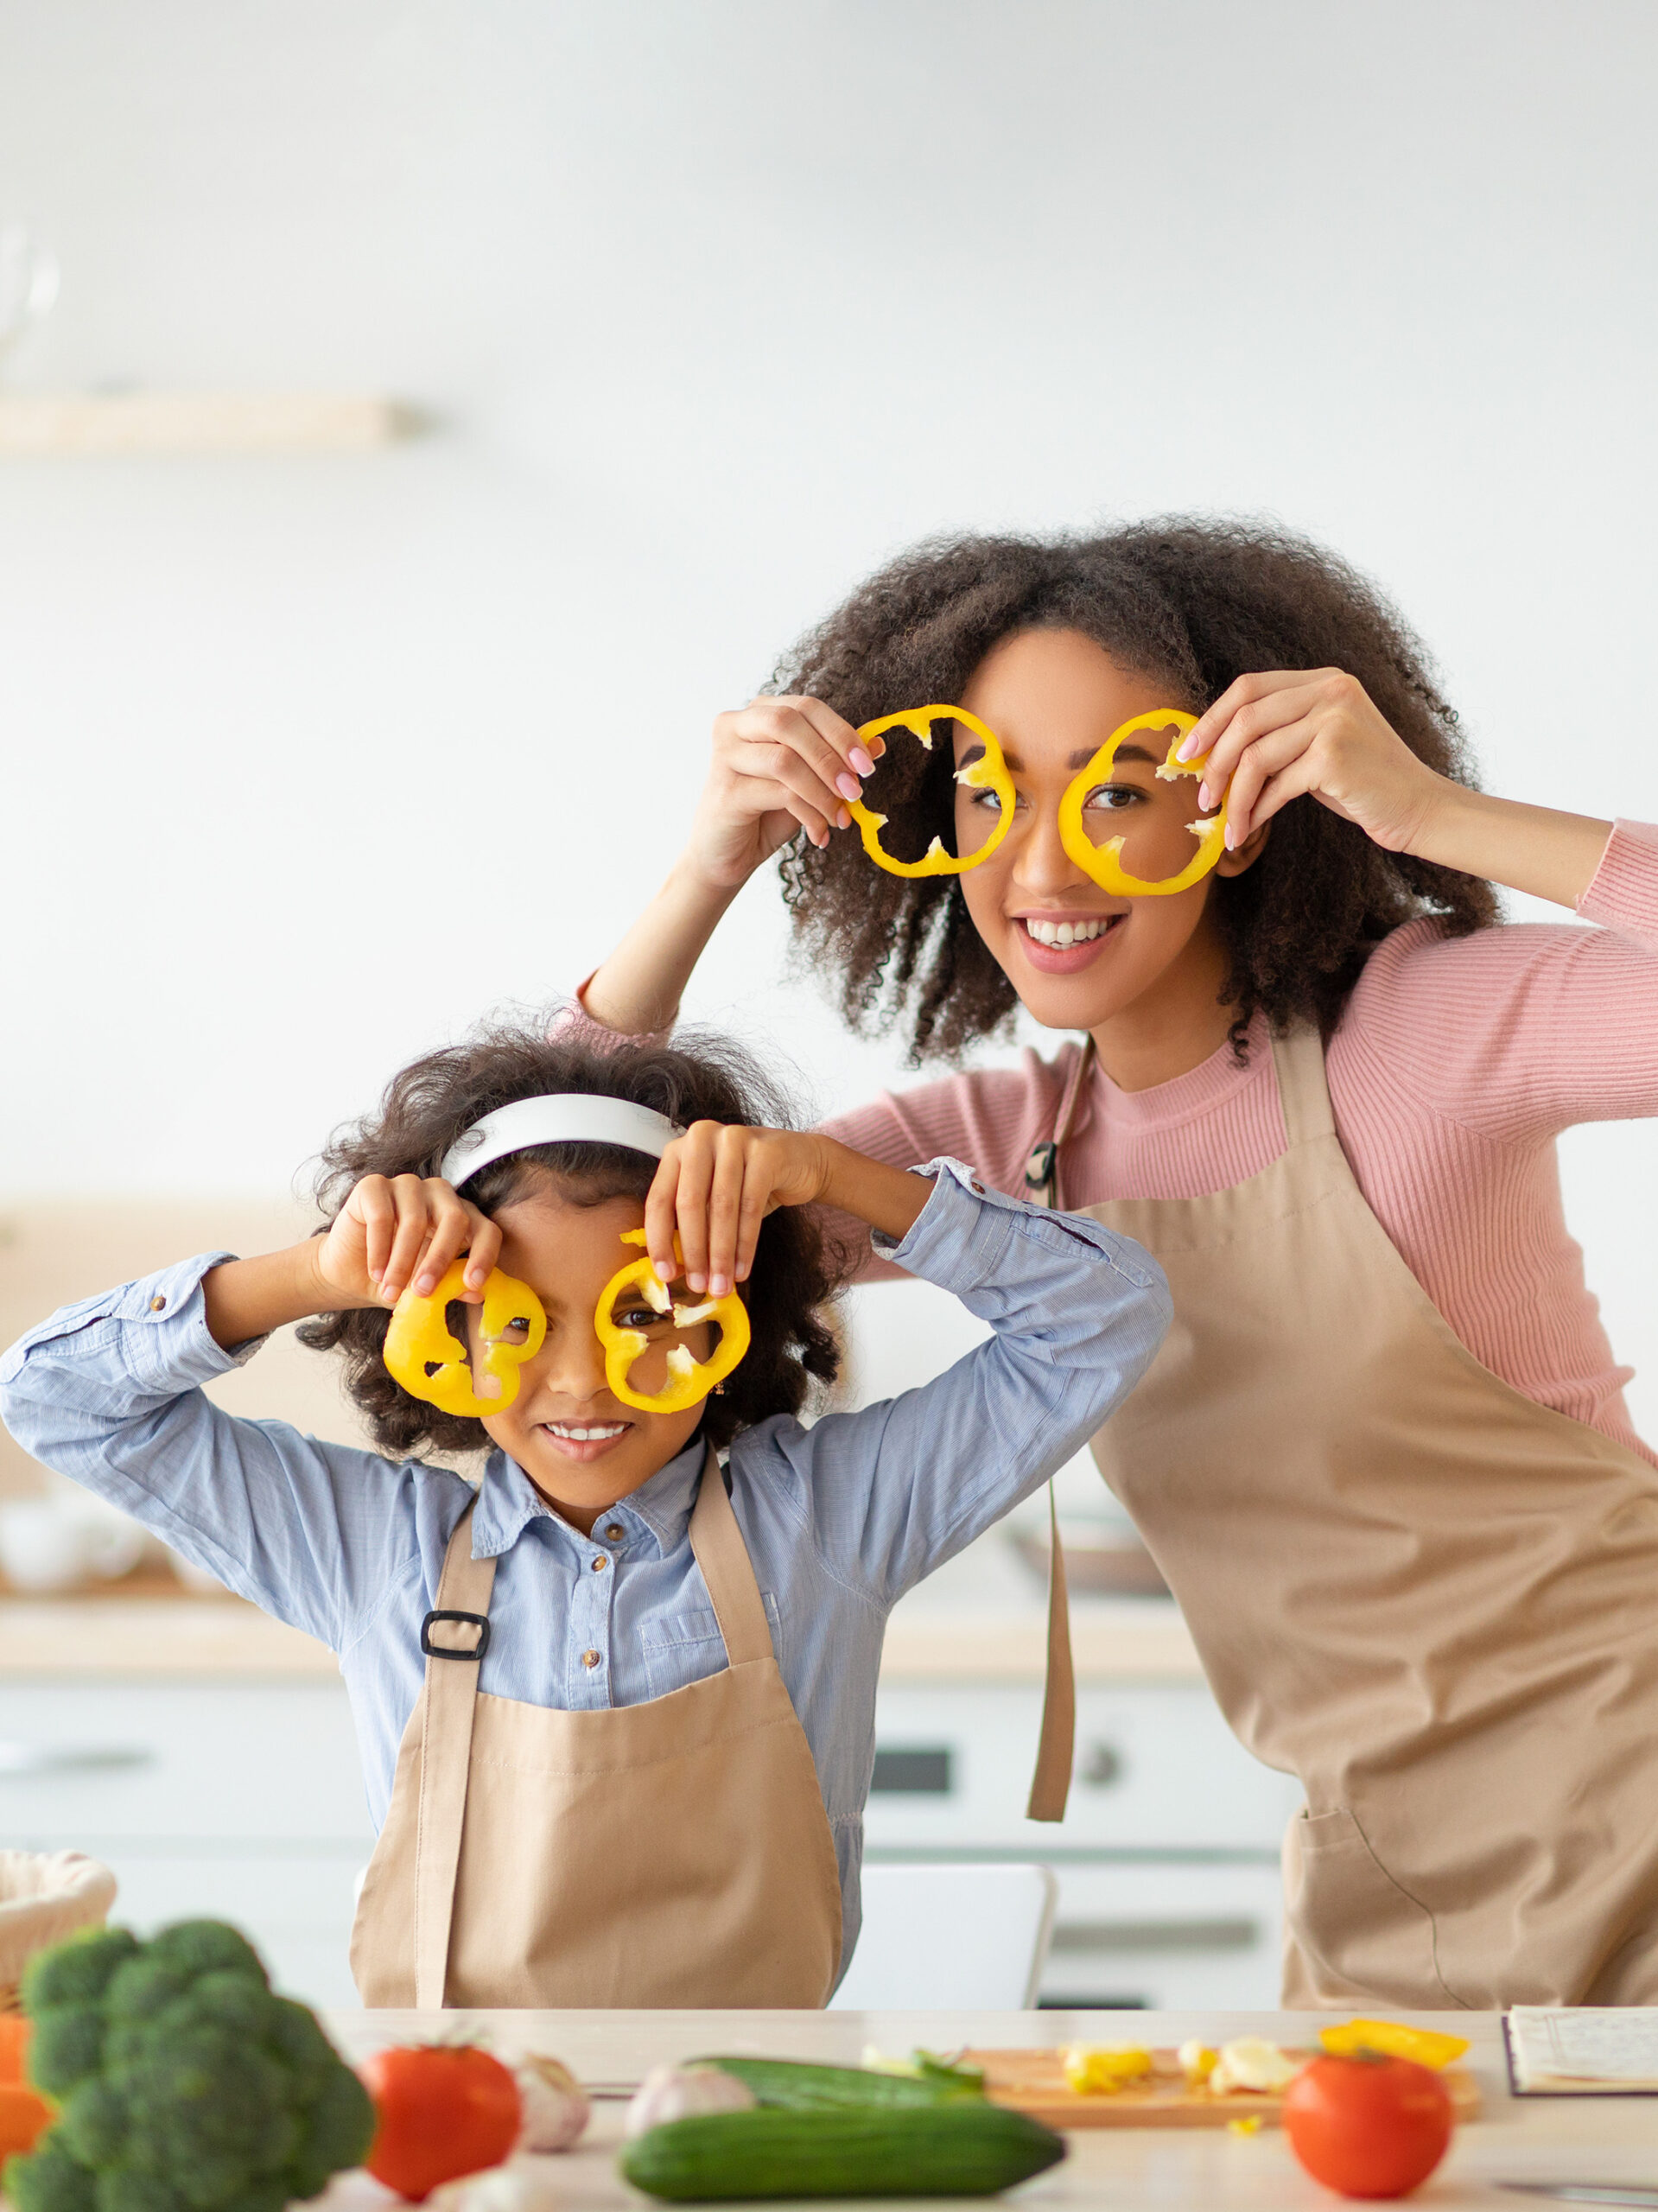 Parent and daughter have fun while eating healthy - they hold bell peppers over eyes while smiling